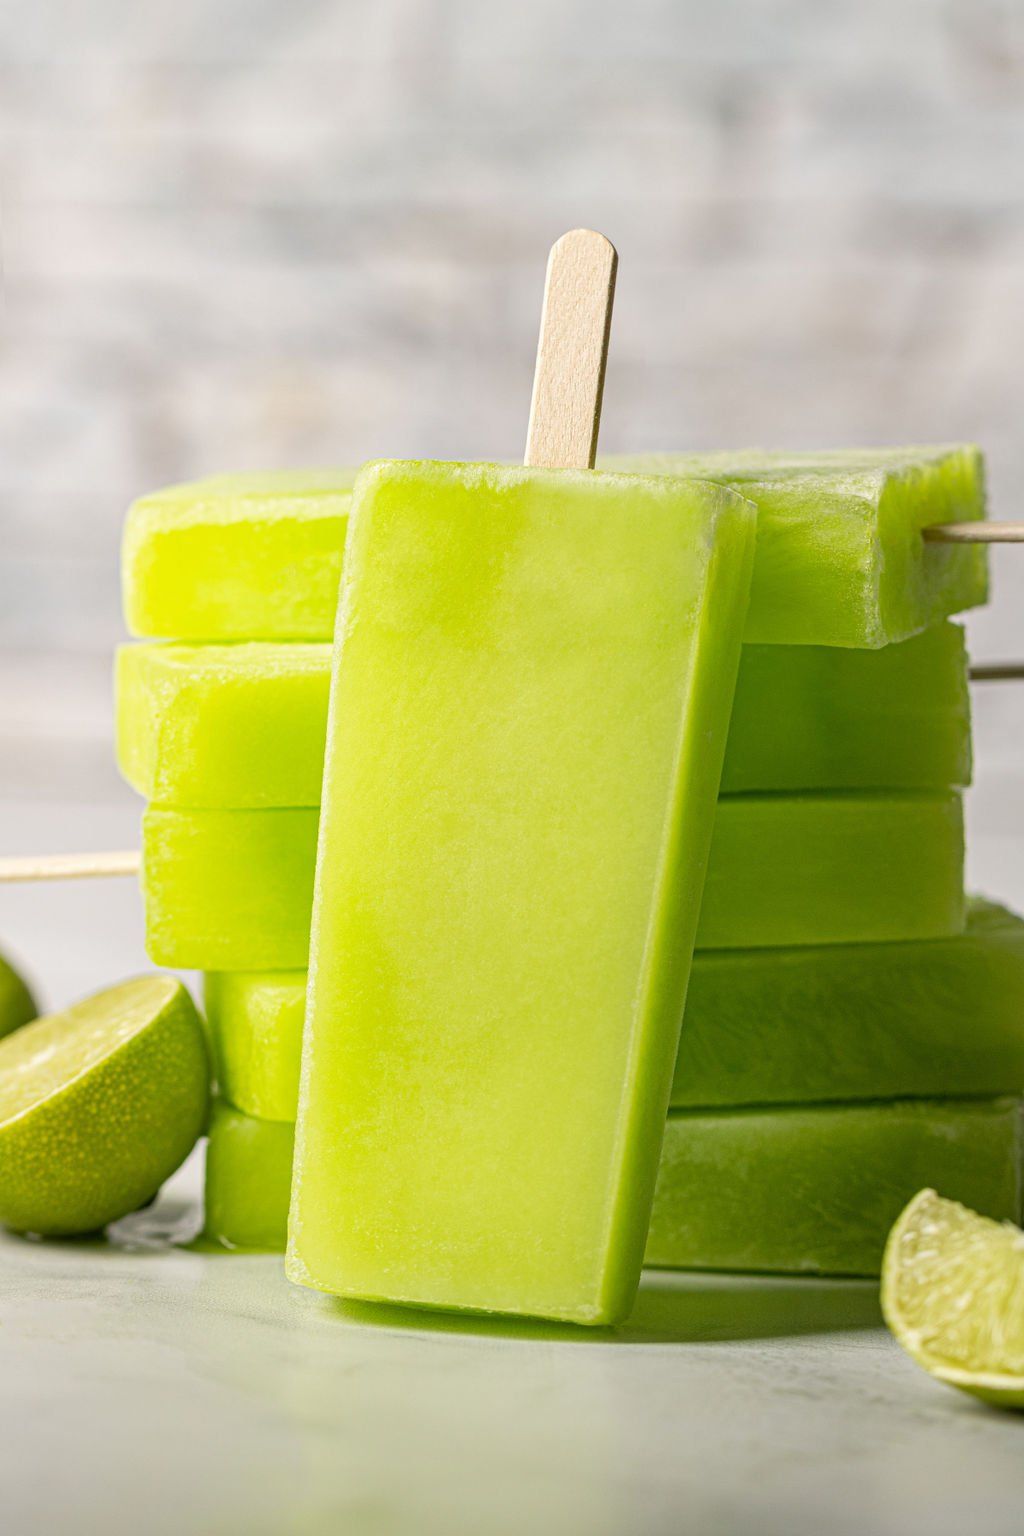 Lime-flavored popsicle